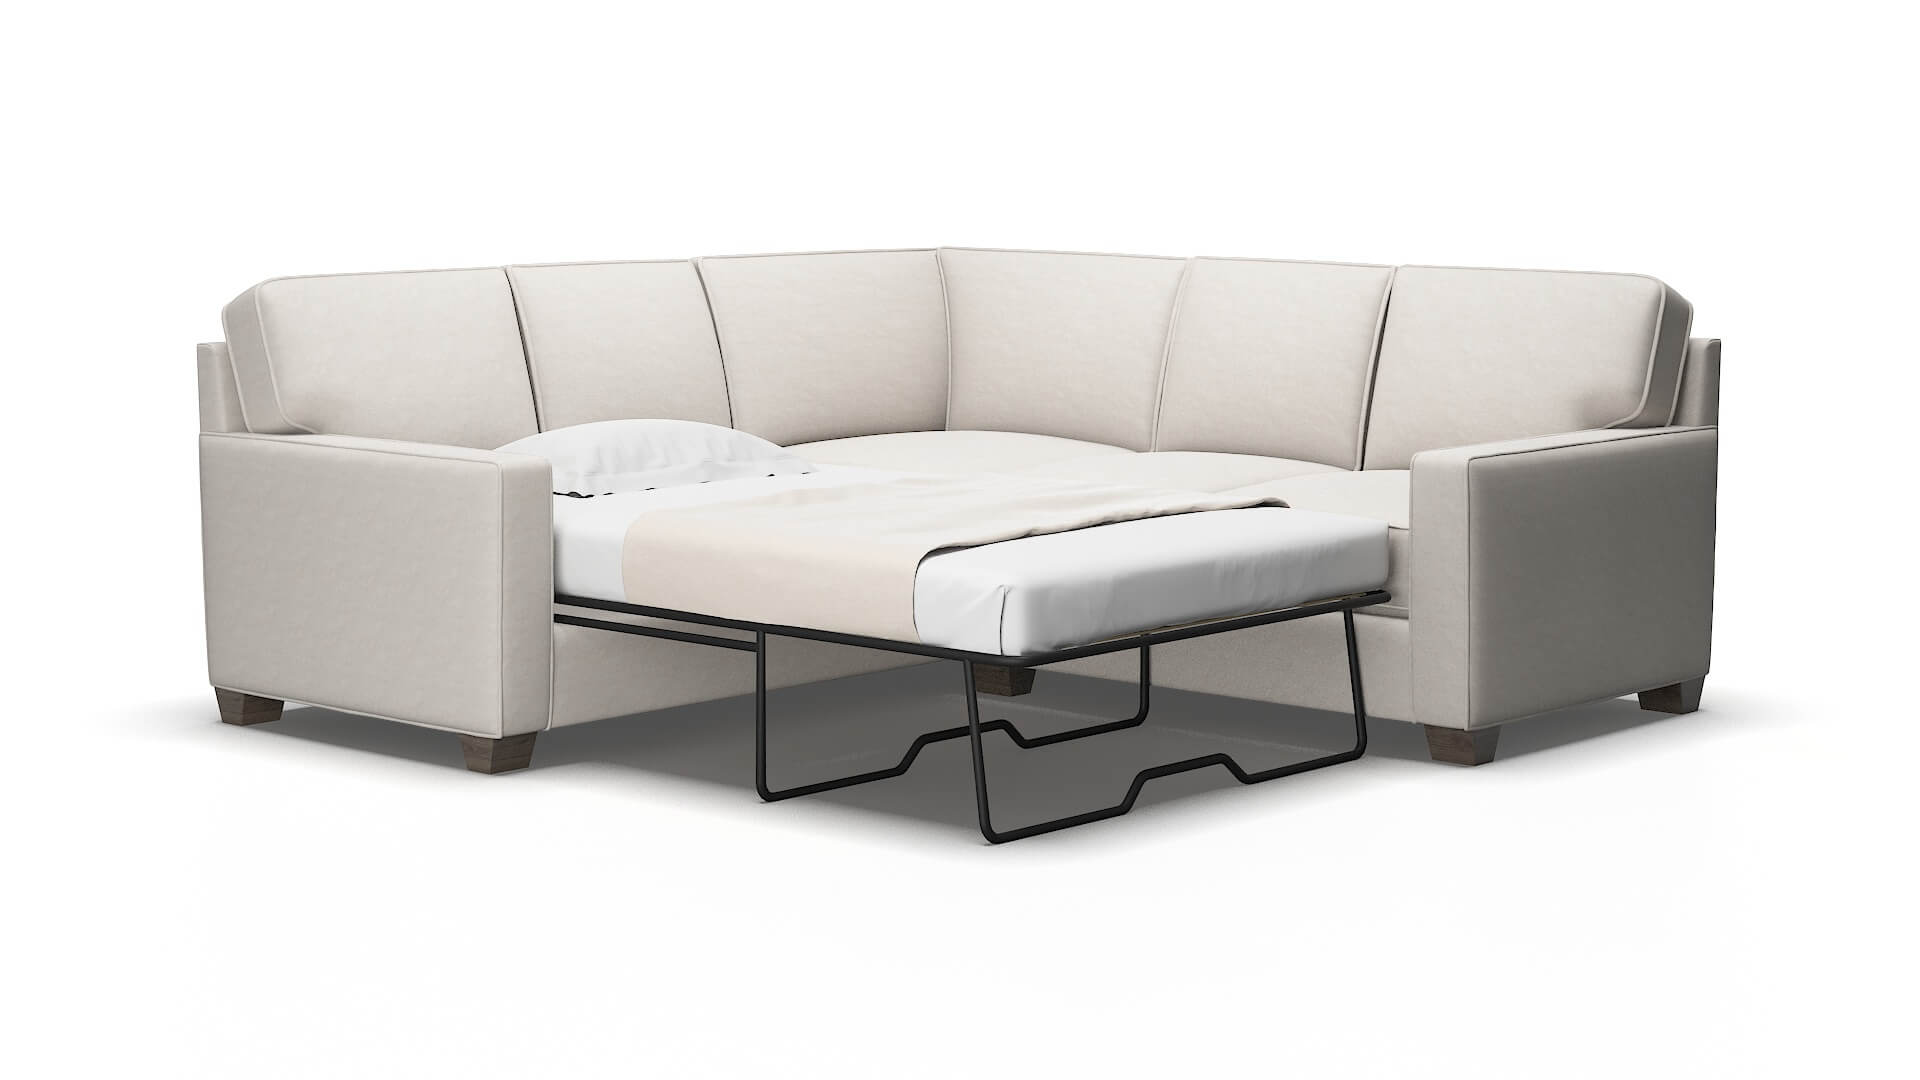 Chicago Dream_d Stone Sectional Sleeper 2